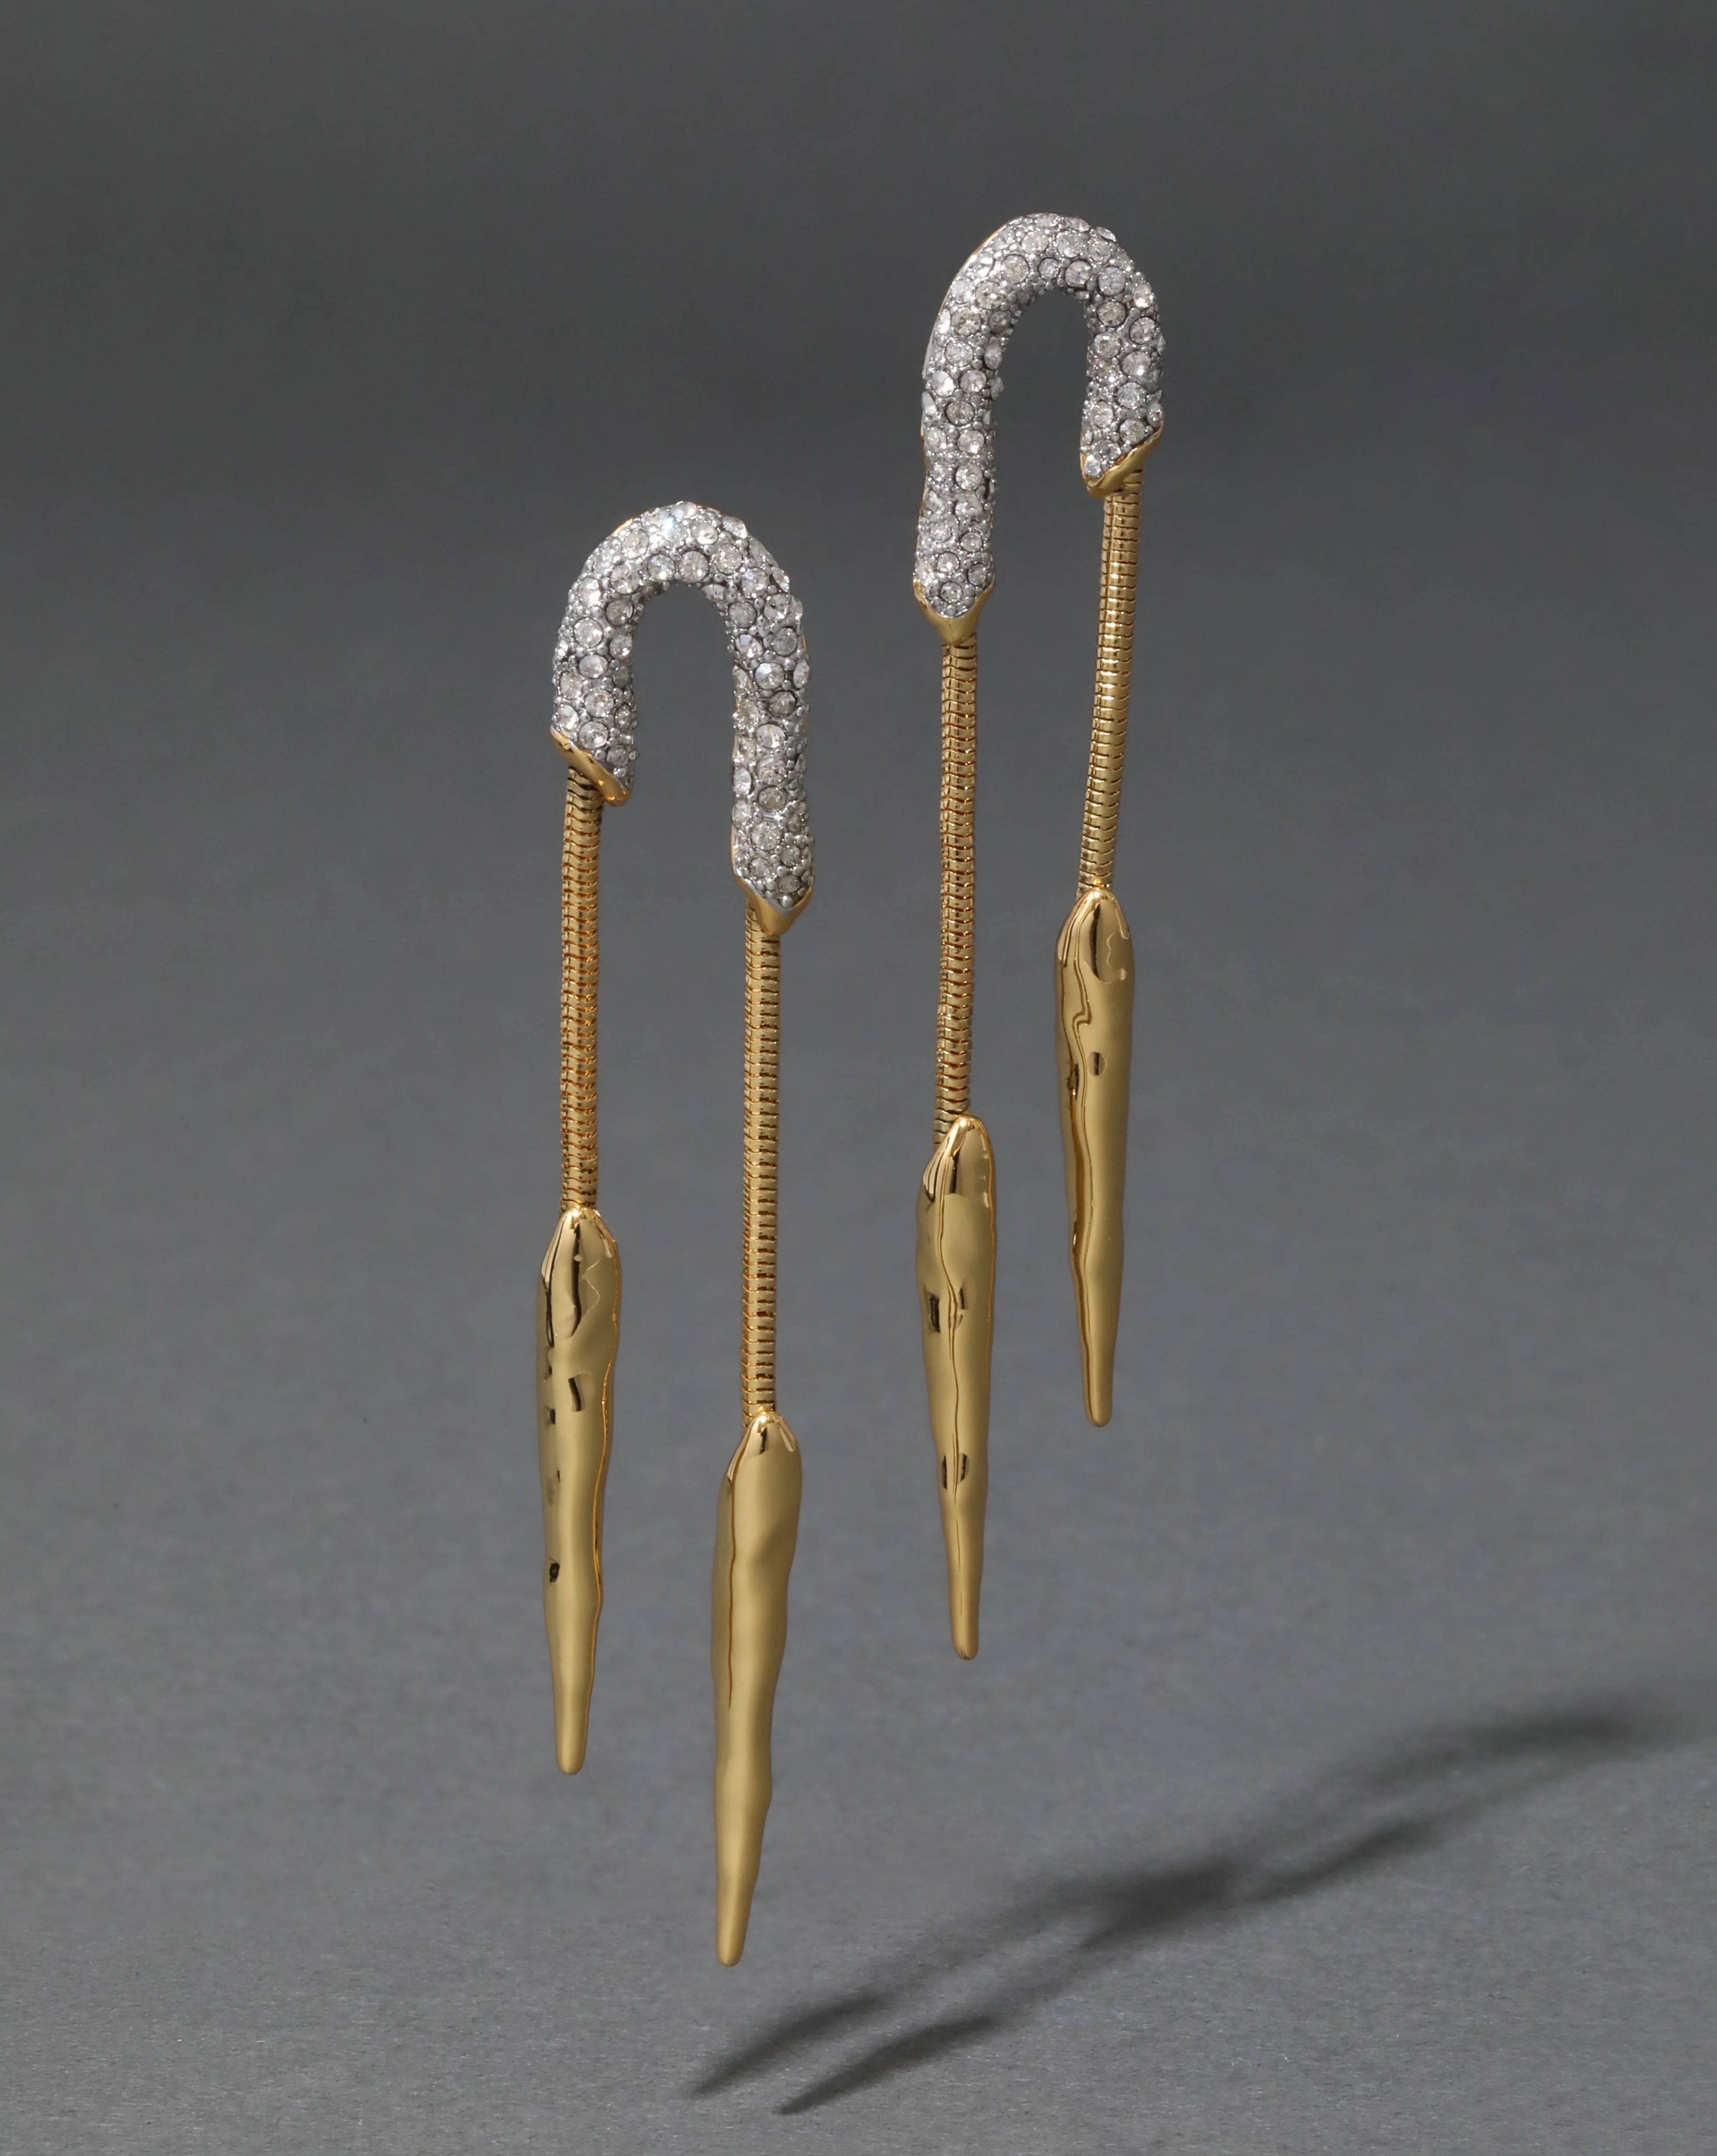 Solanales Crystal Chained Spear Earring | Alexis Bittar | Alexis Bittar